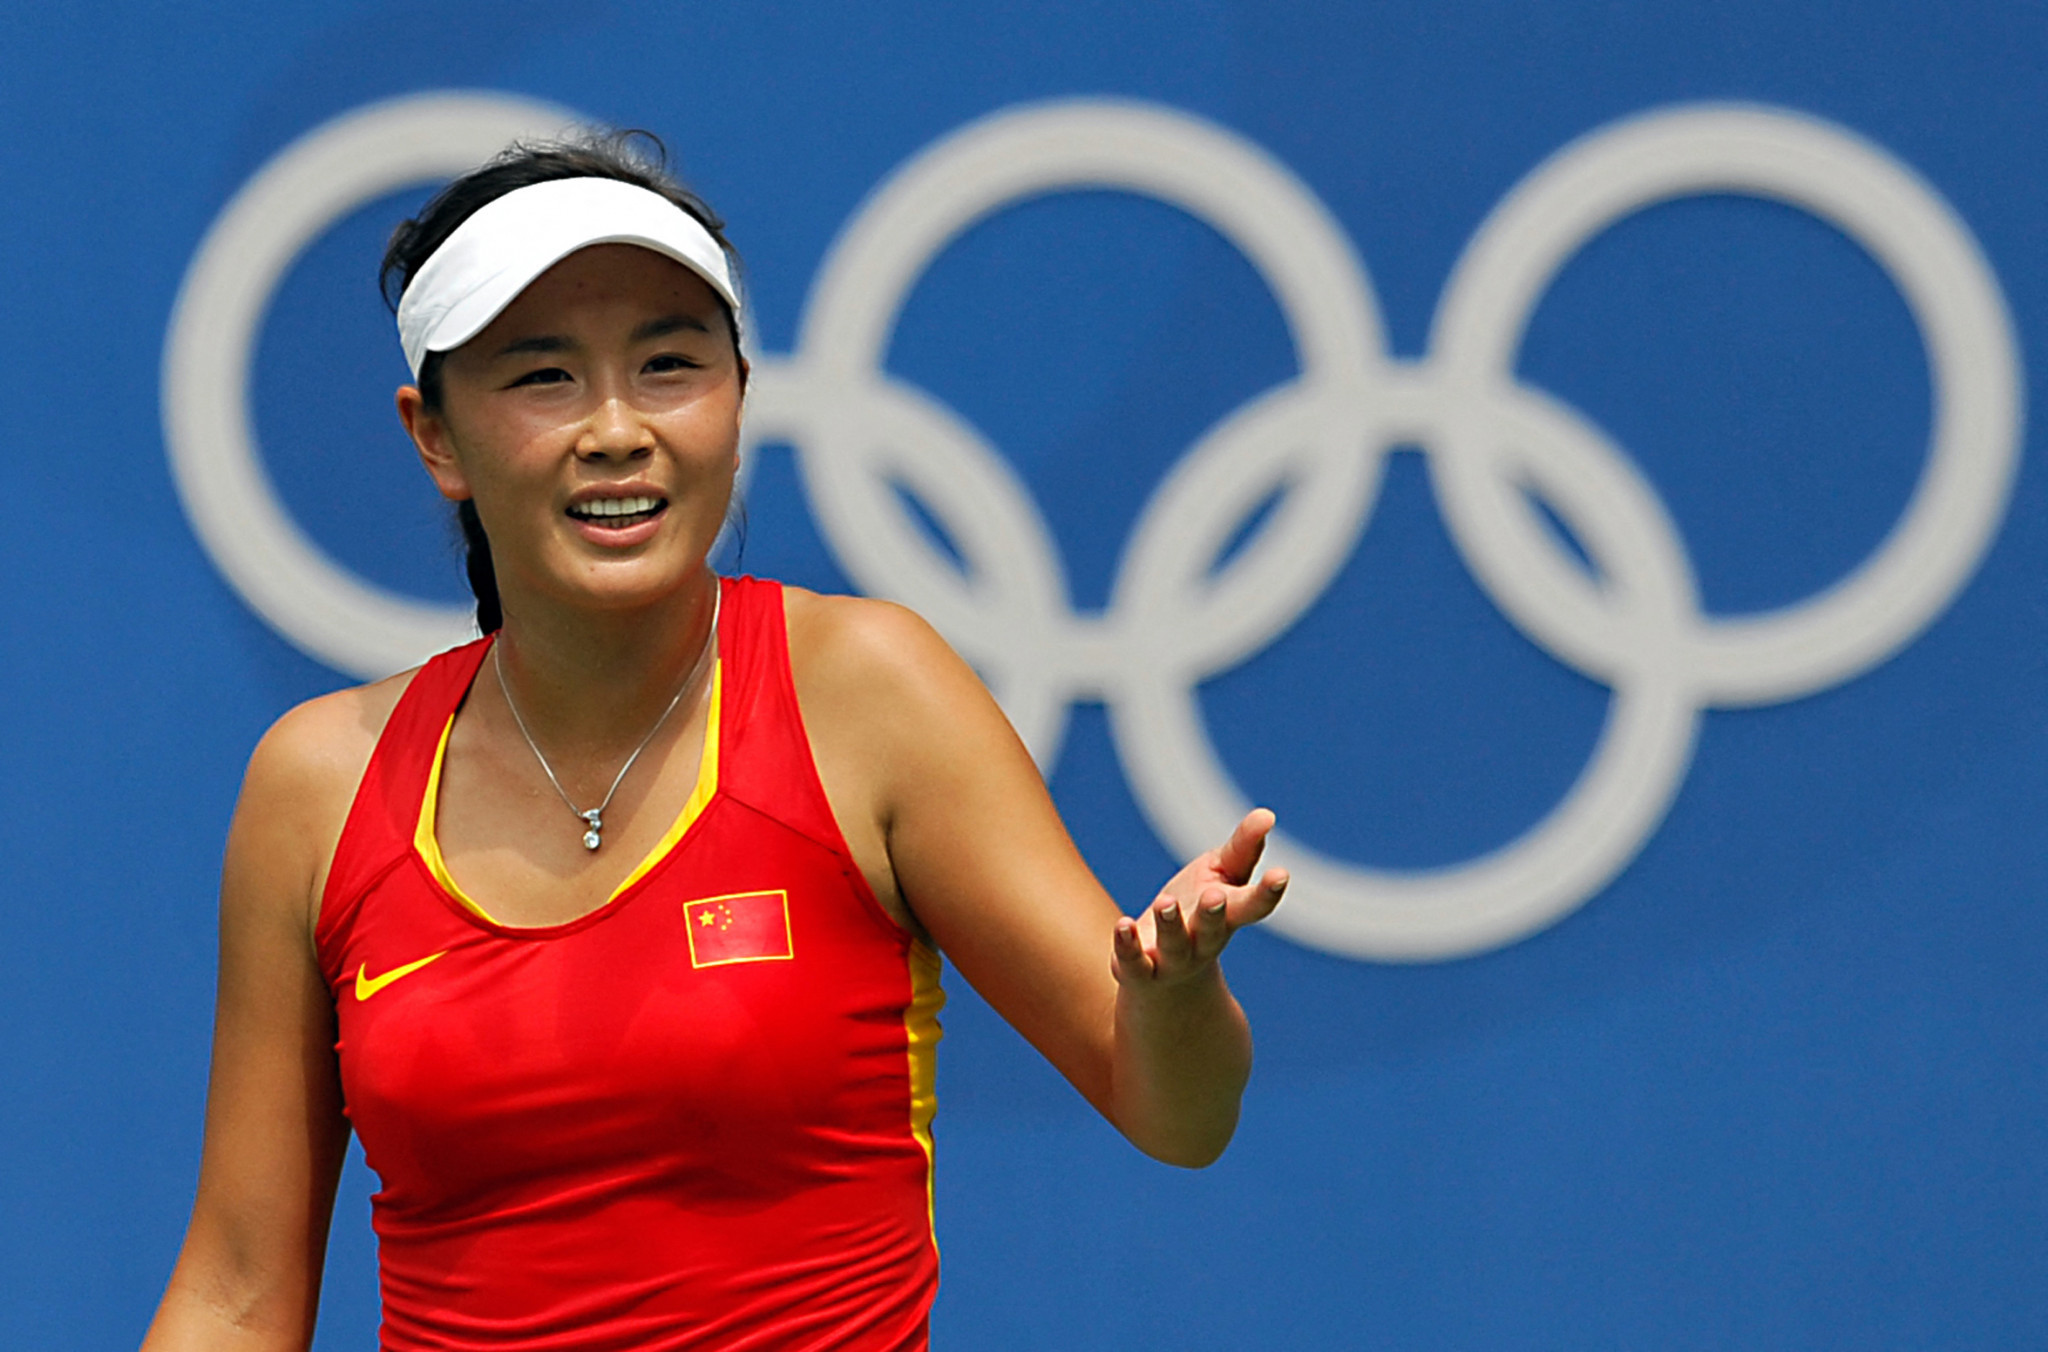 The IOC confirmed a meeting with Peng Shuai took place yesterday ©Getty Images